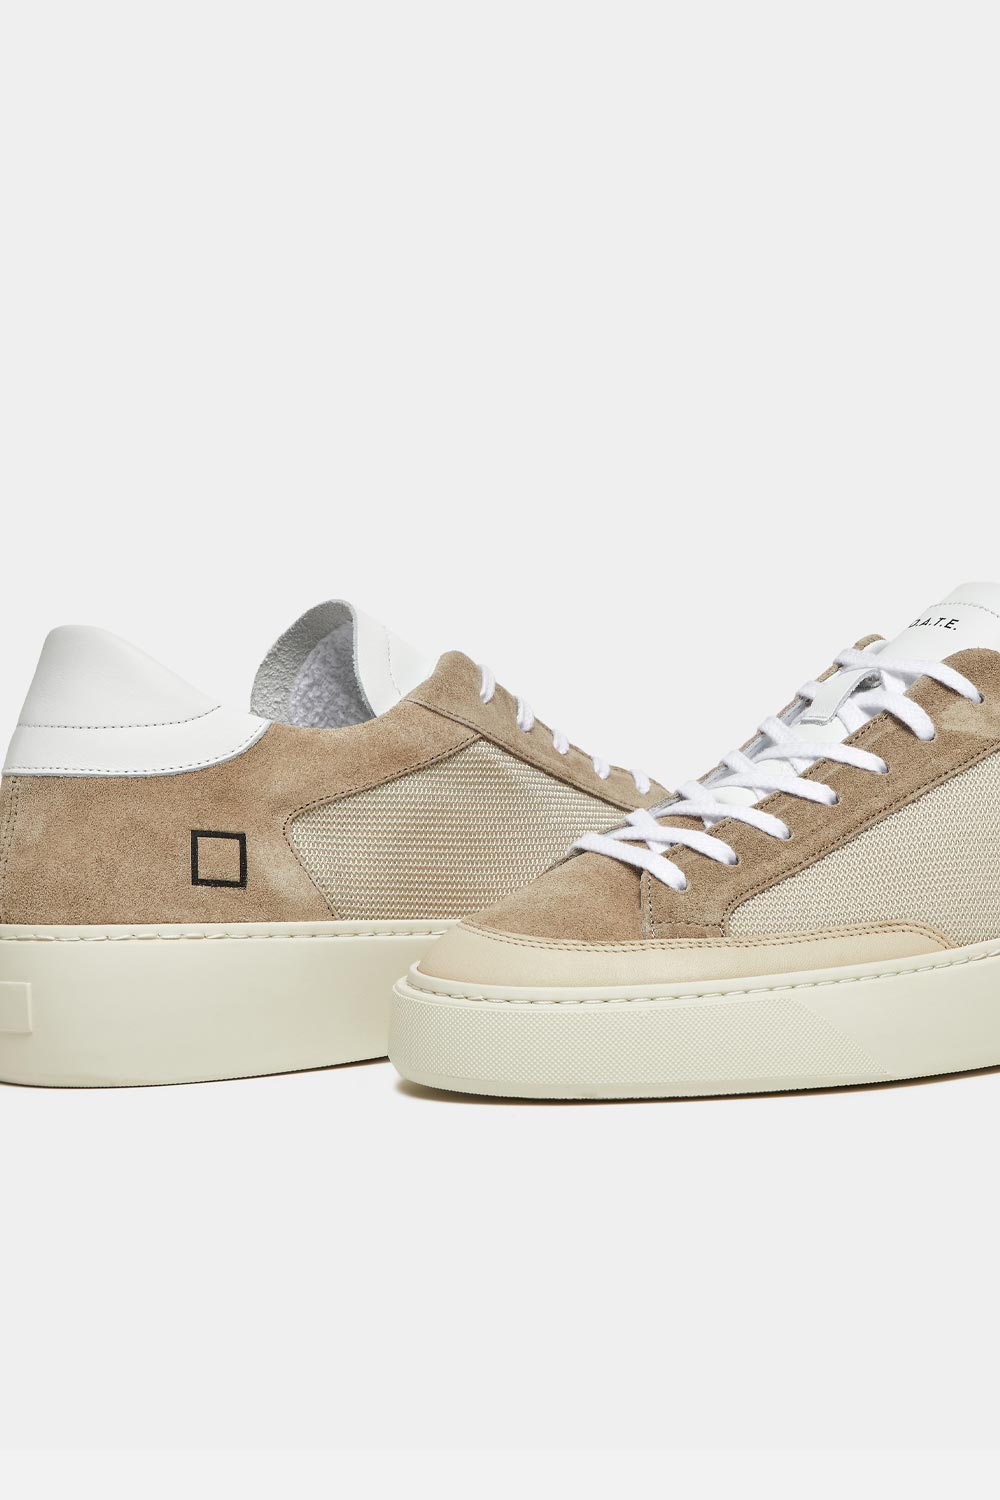 Buy the D.A.T.E. Levante Dragon Sneaker in Beige at Intro. Spend £50 for free UK delivery. Official stockists. We ship worldwide.